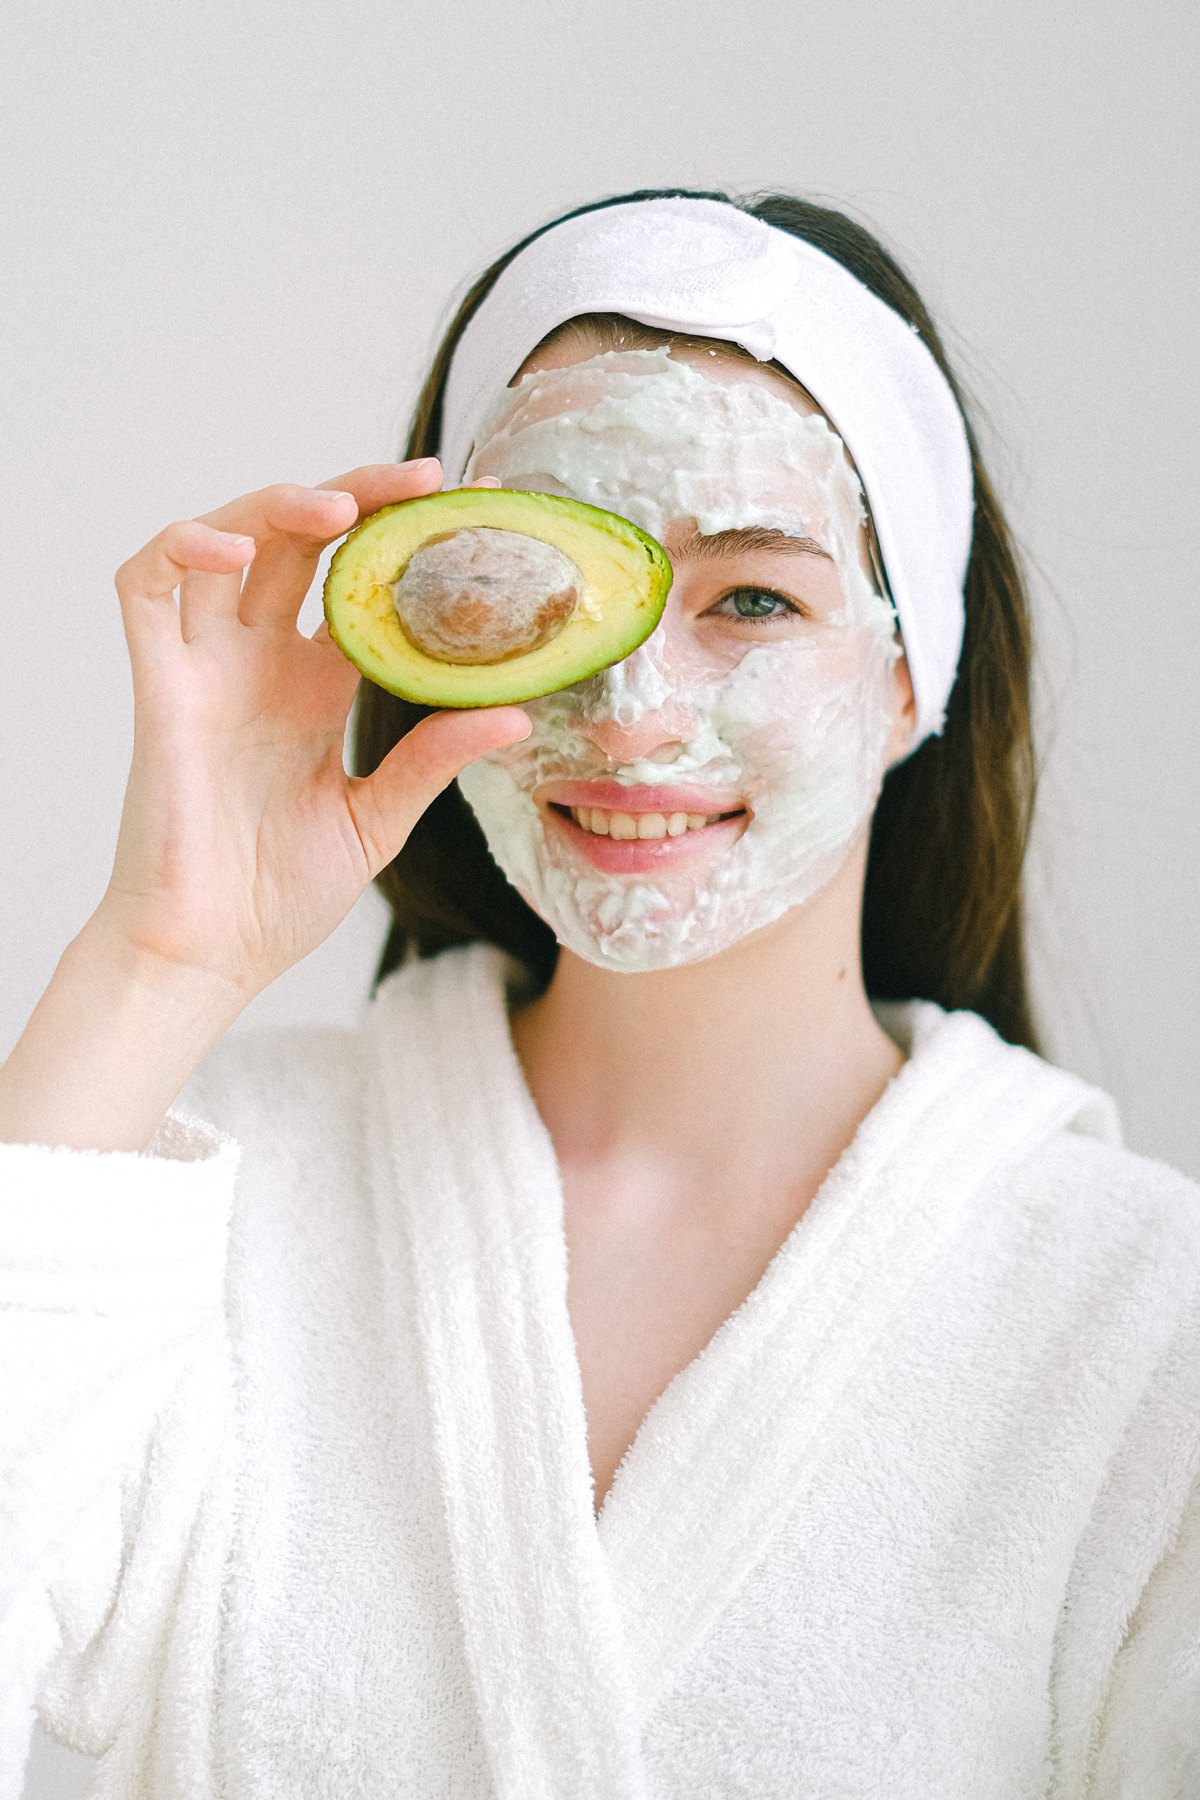 How to Make Your Own Avocado Face Mask for Clearer Skin